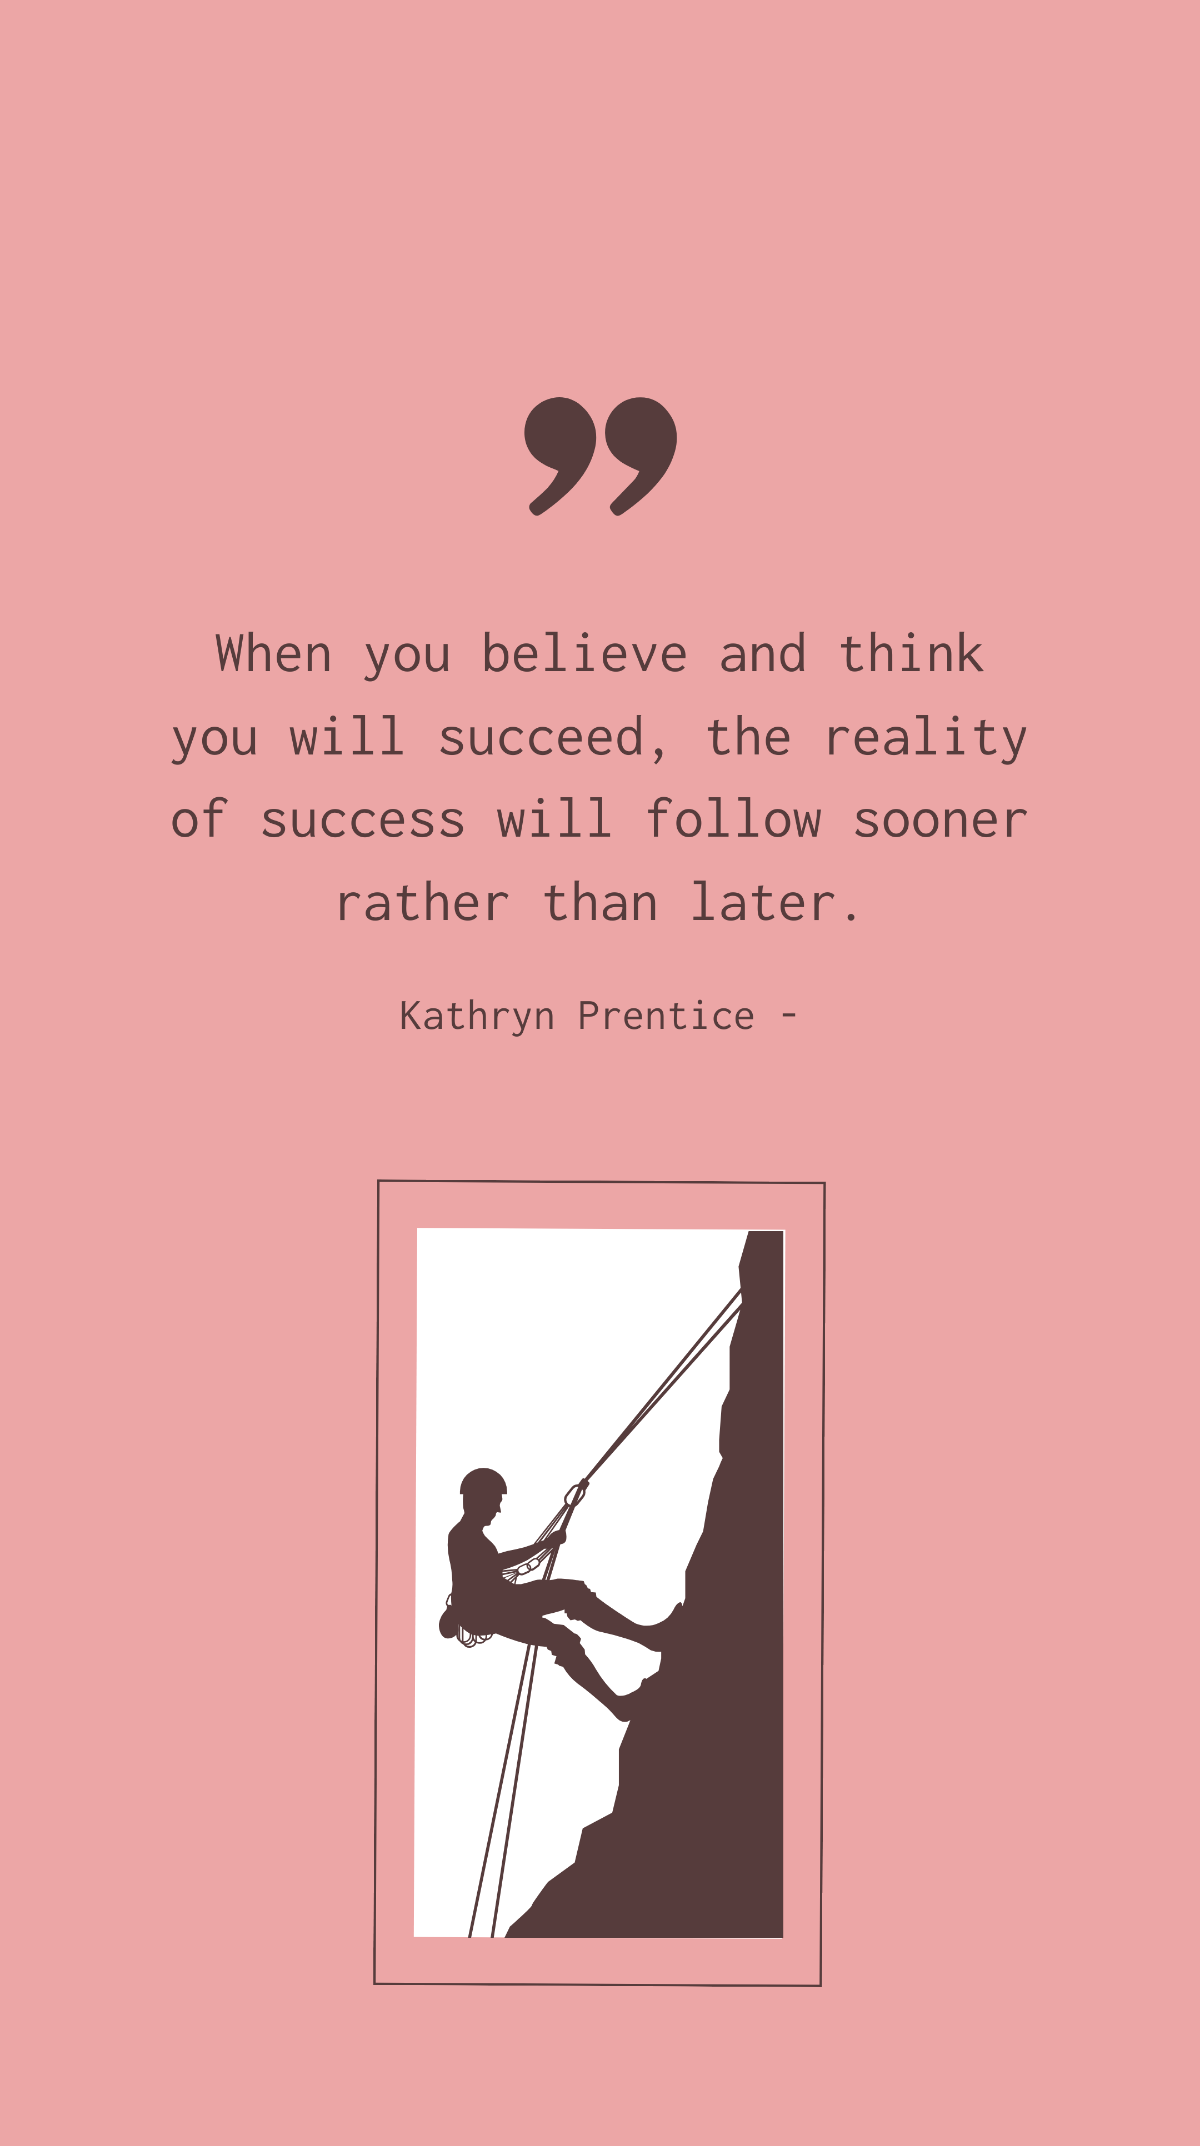 Kathryn Prentice - When you believe and think you will succeed, the reality of success will follow sooner rather than later. Template